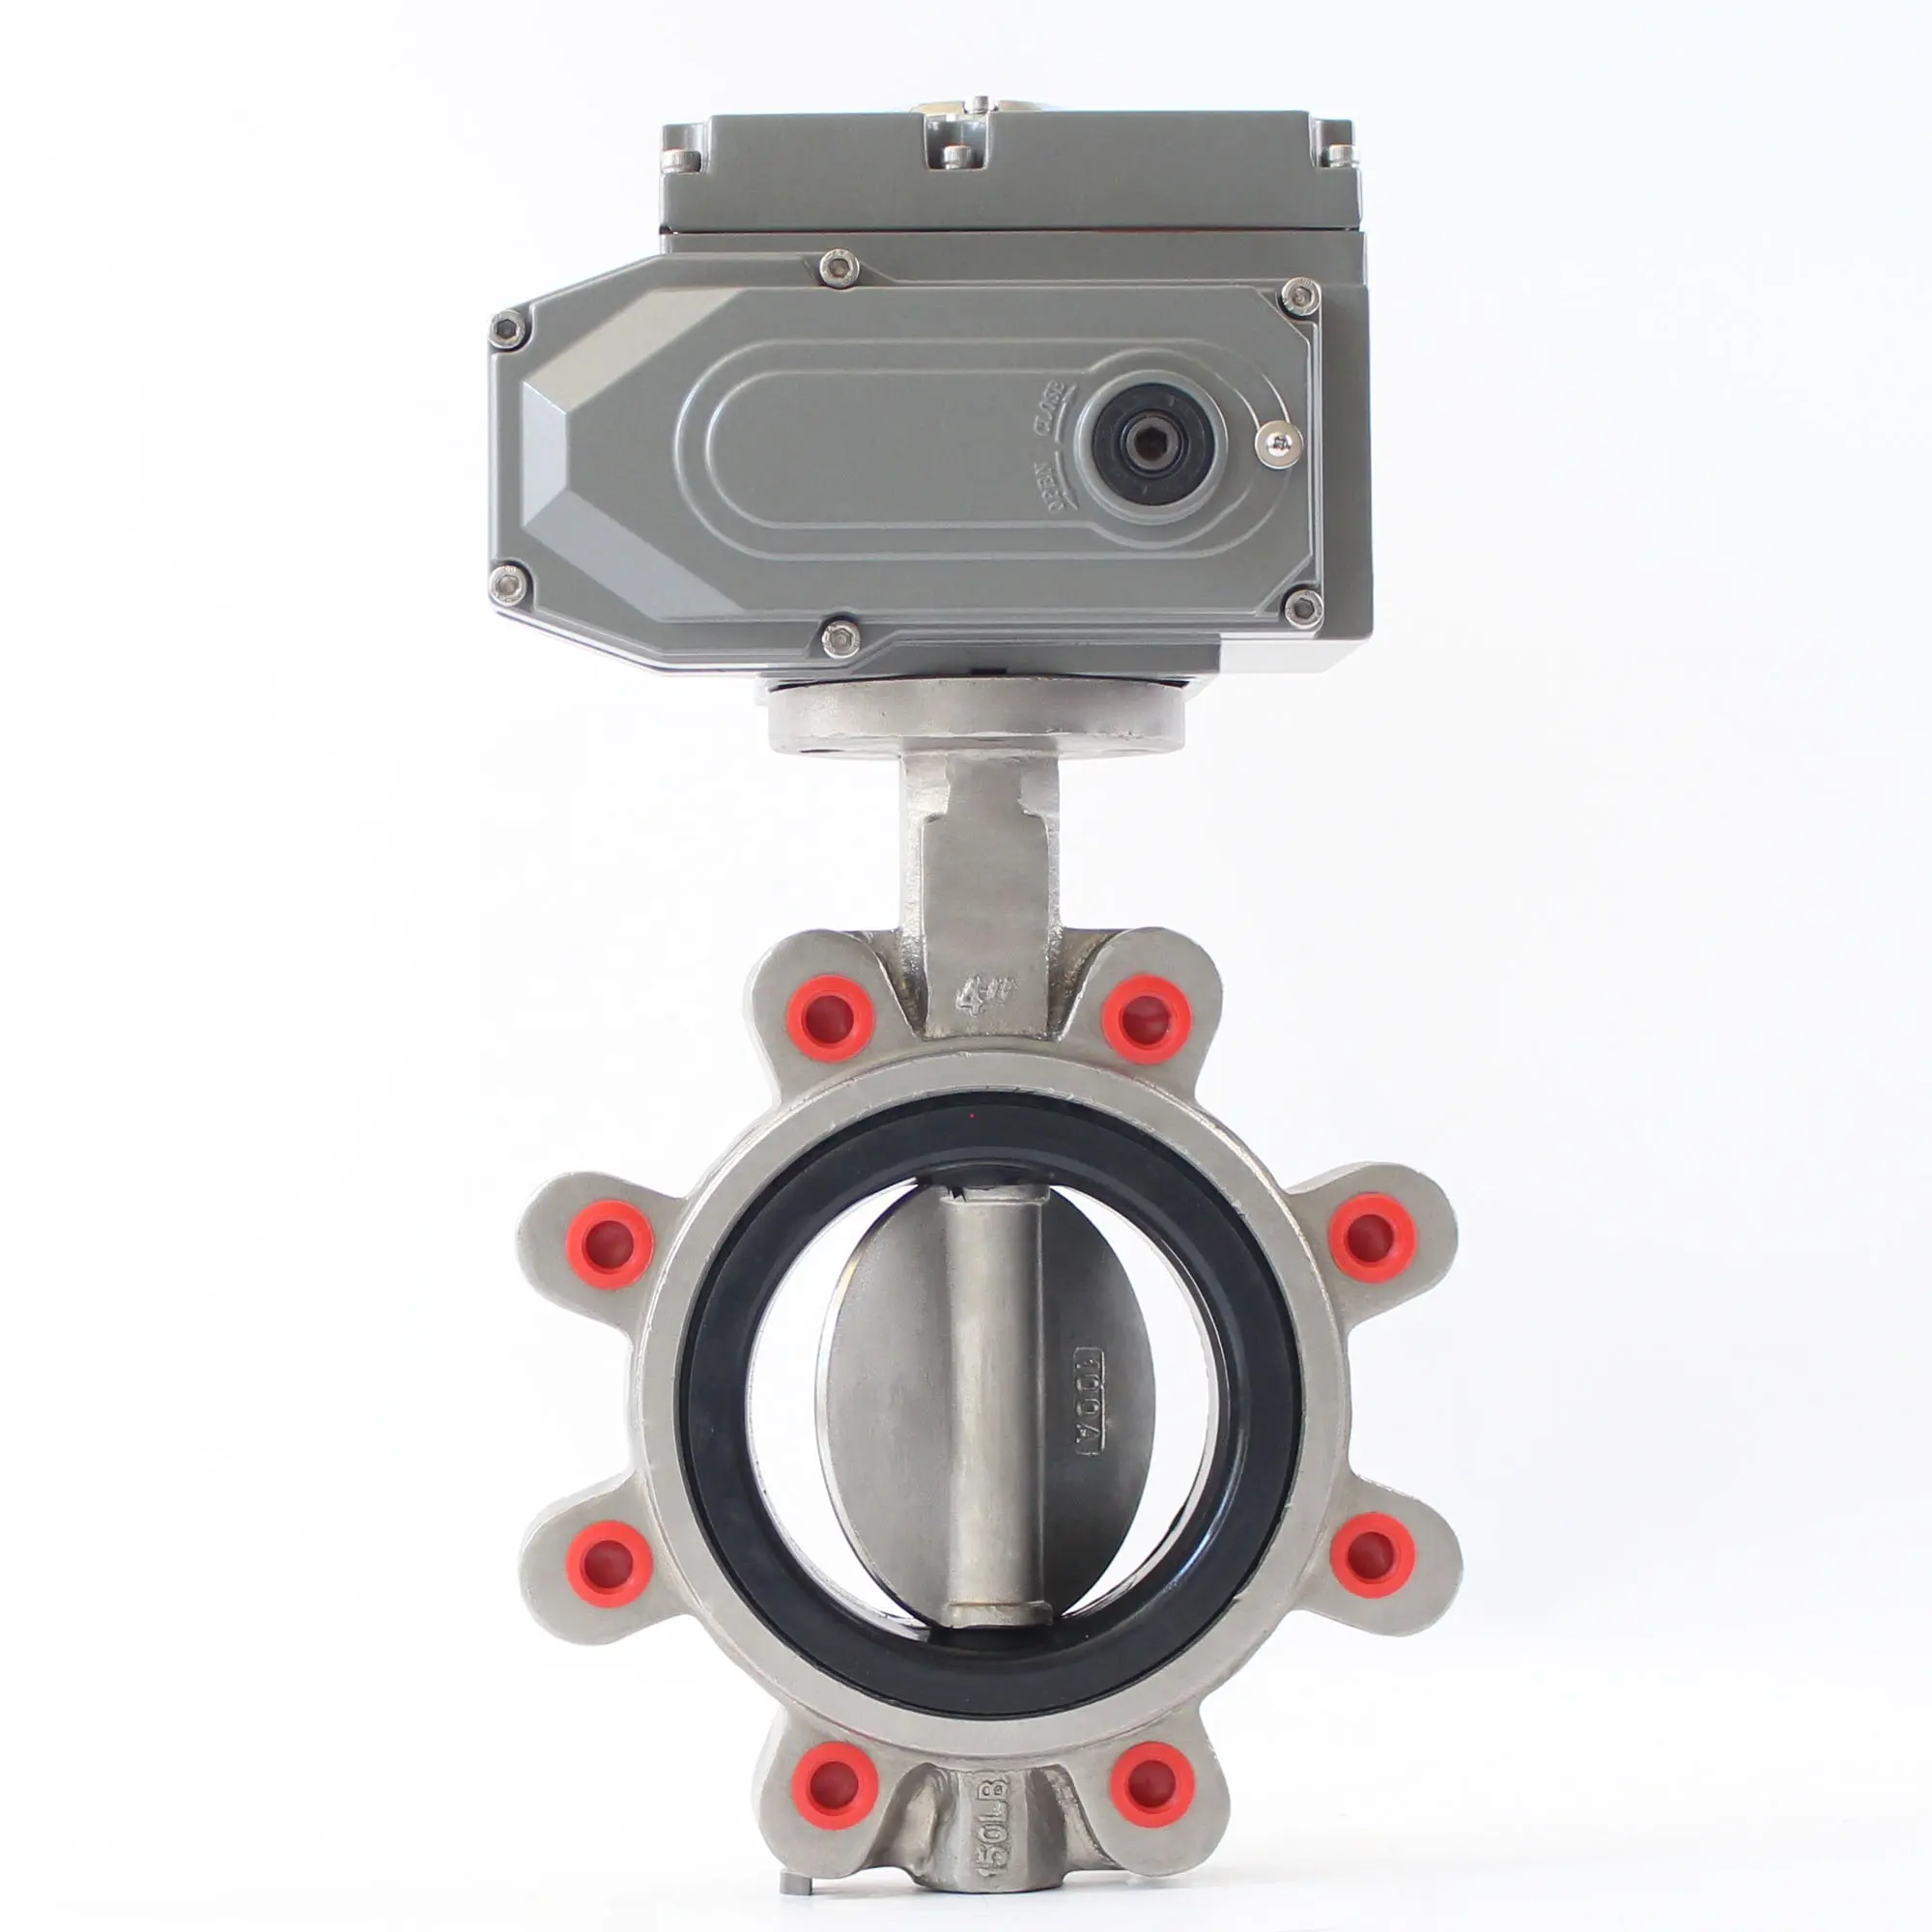 Lugged 3 4 6 8 Inch EPDM Seated Marine Valve SS304 CF8 Lug Type Electric Actuated Stainless Steel Butterfly Valve Price